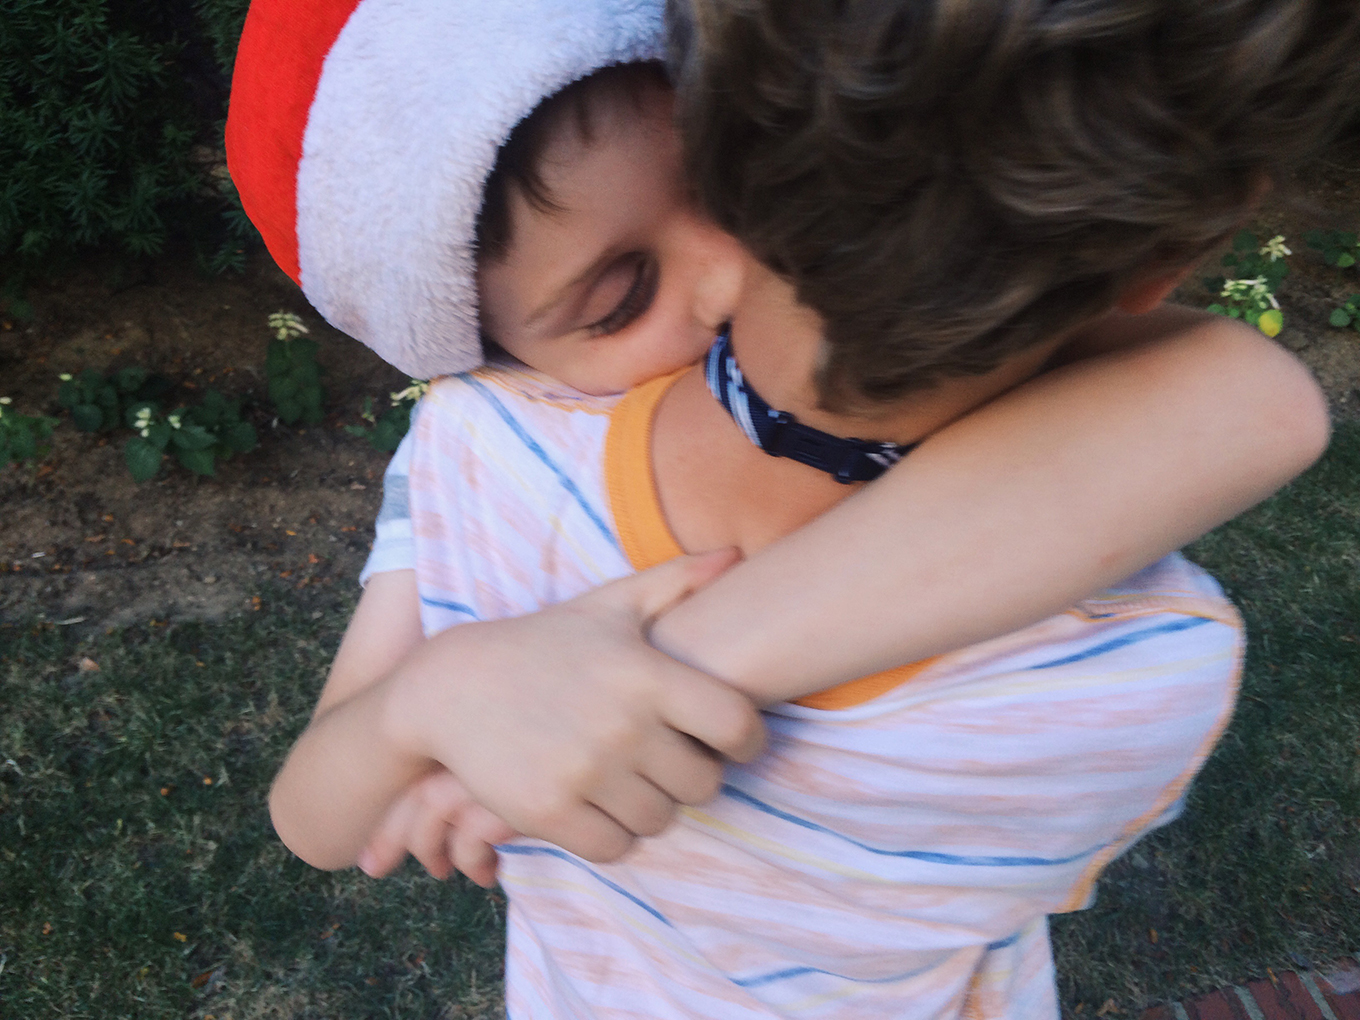 C shows his brother some serious affection